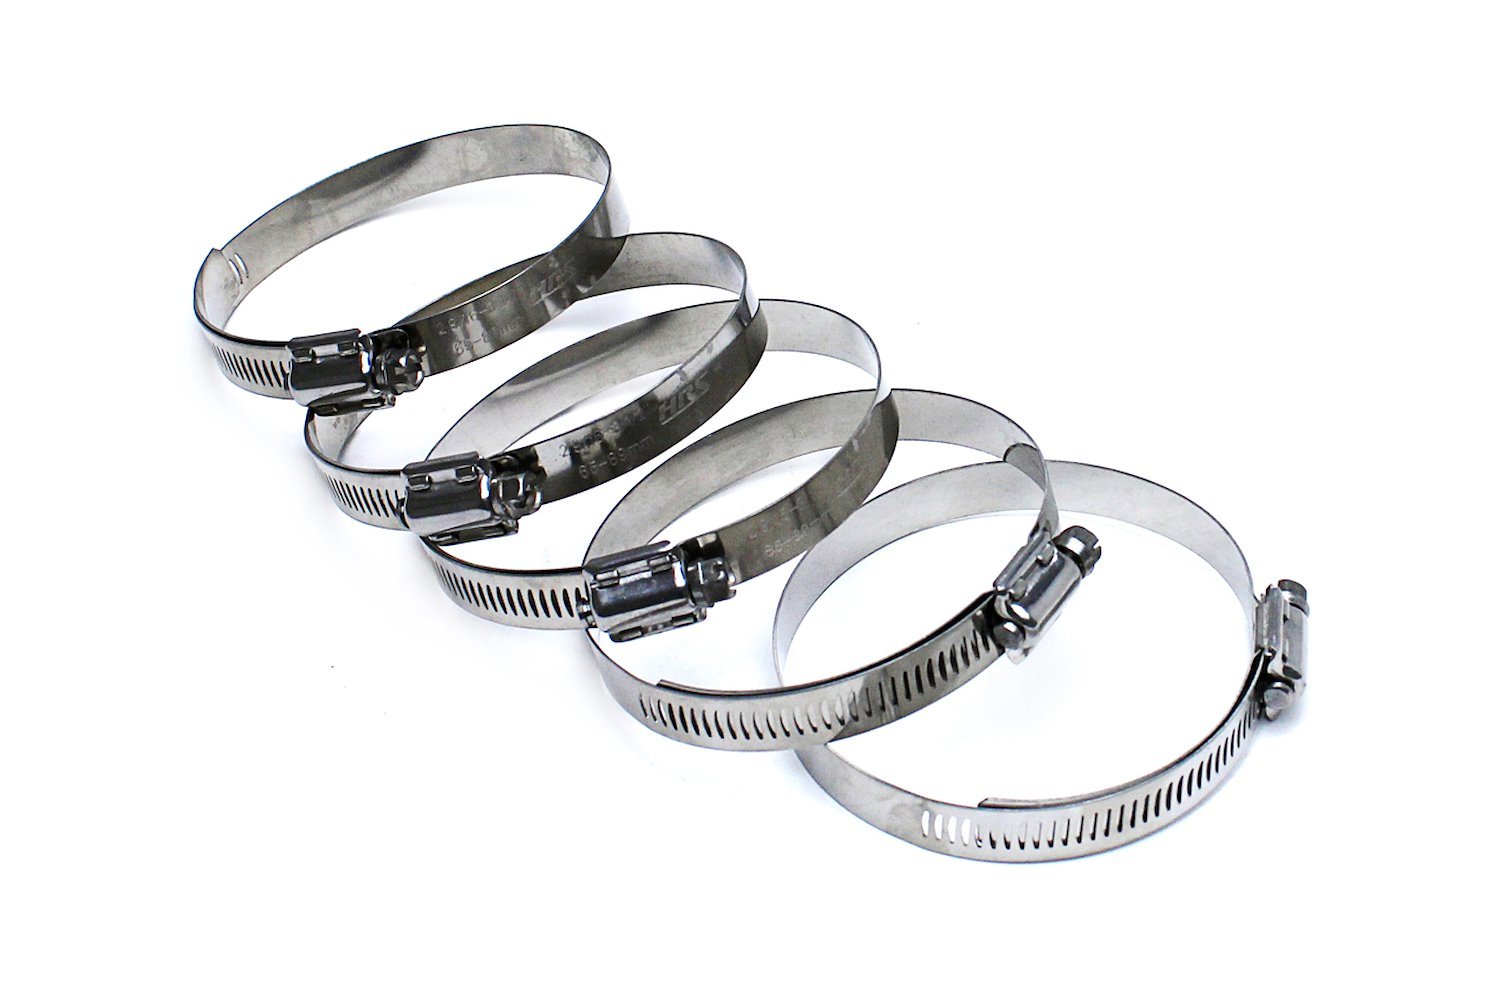 SSWC-59-83x5 Stainless Steel Worm Gear Hose Clamp, Effective Range: 2-5/16 in.- 3-1/4 in., 5Pc